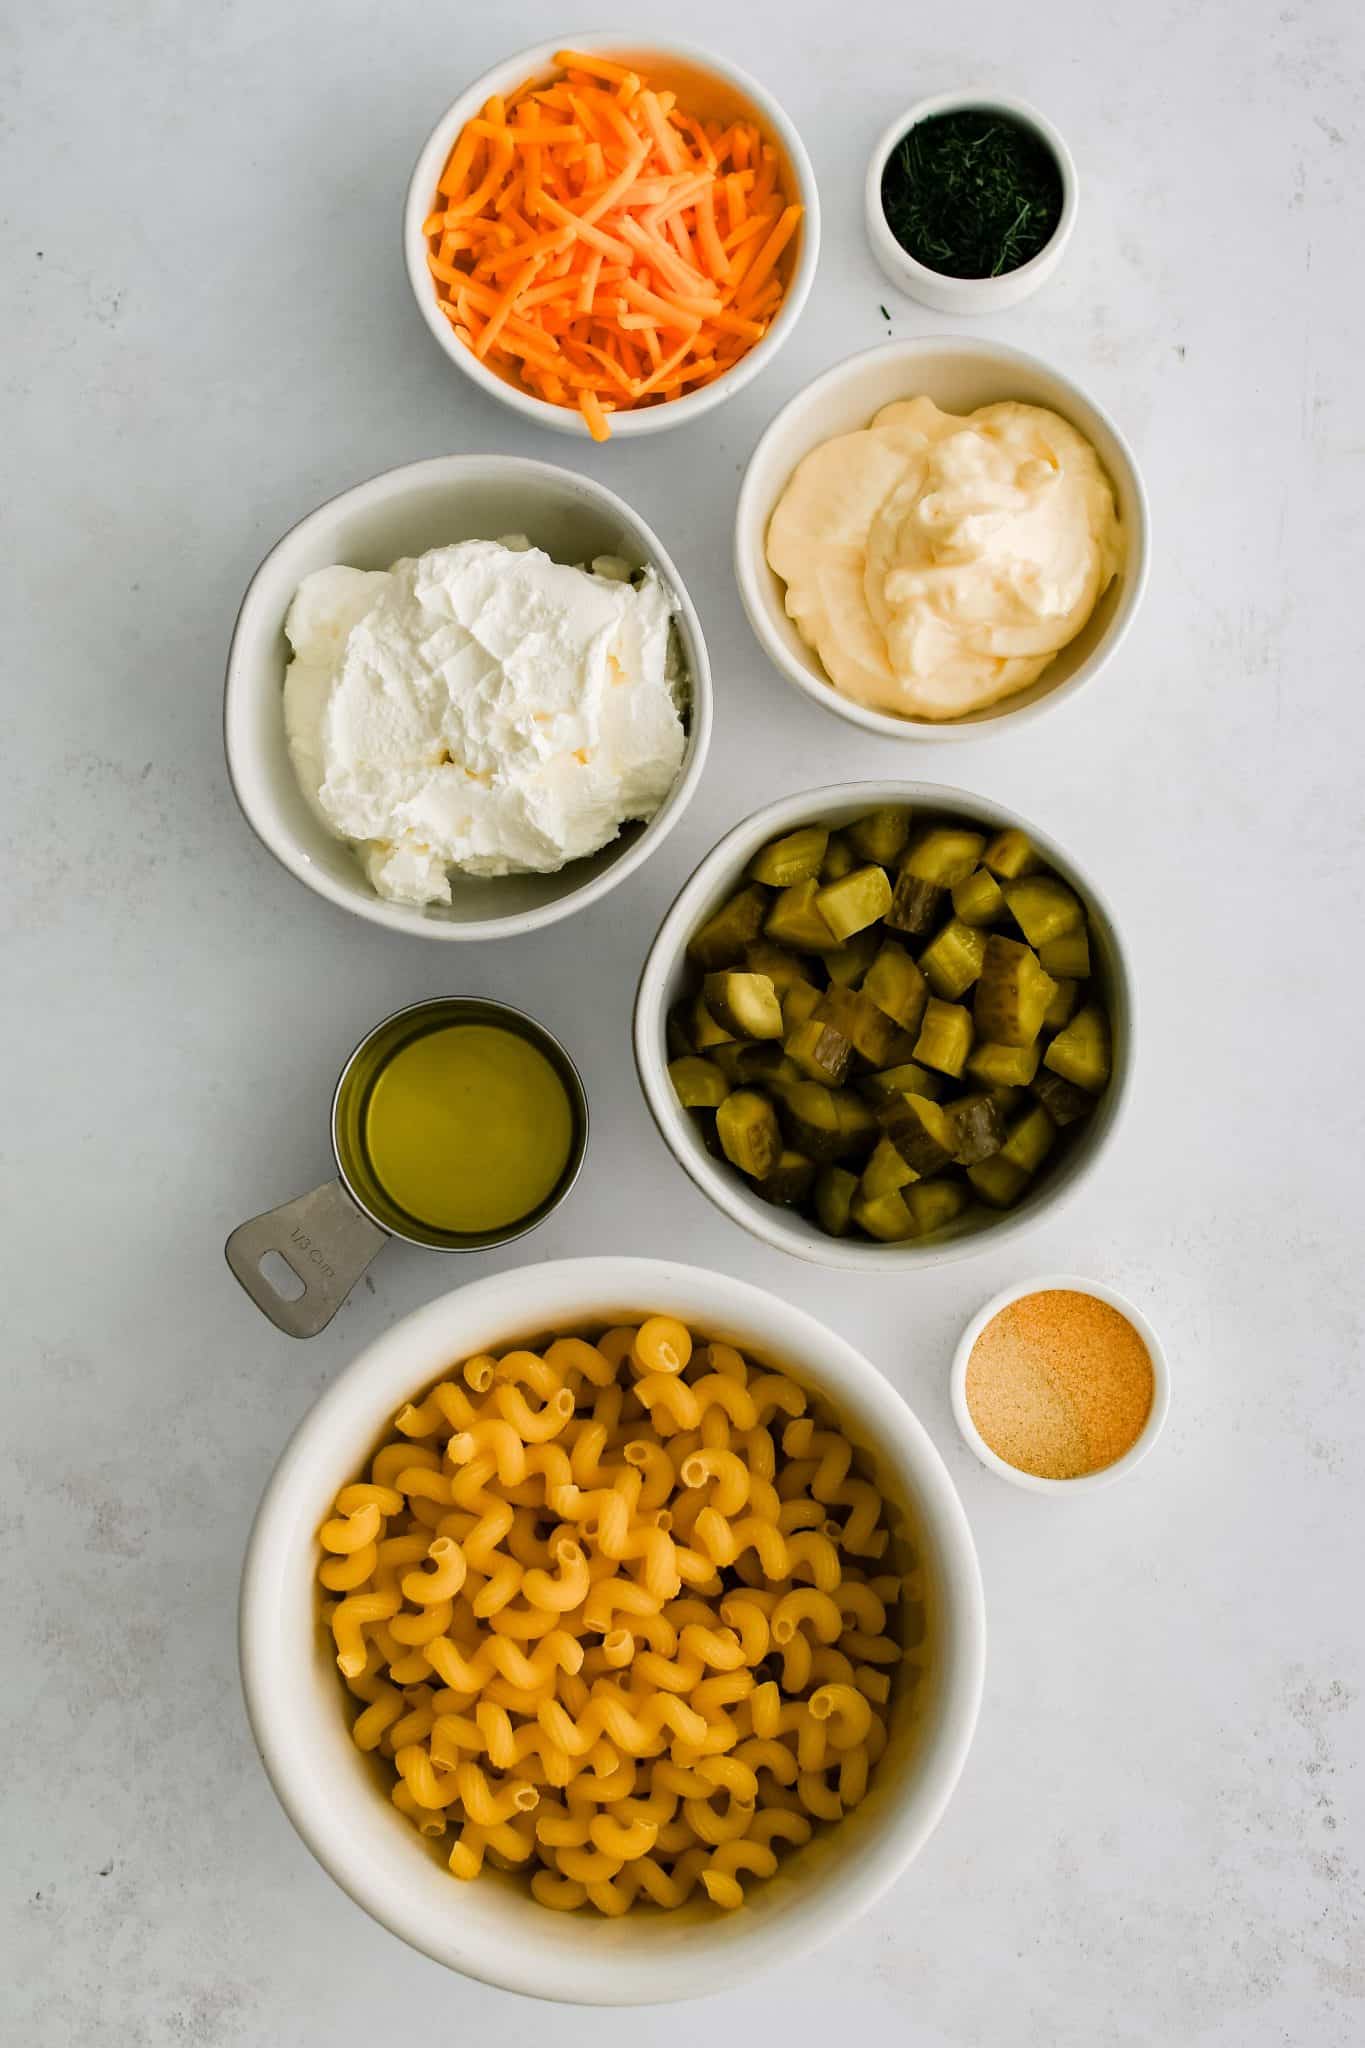 All of the ingredients for the dill pickle pasta salad recipe presented in individual measuring cups and ramekins.